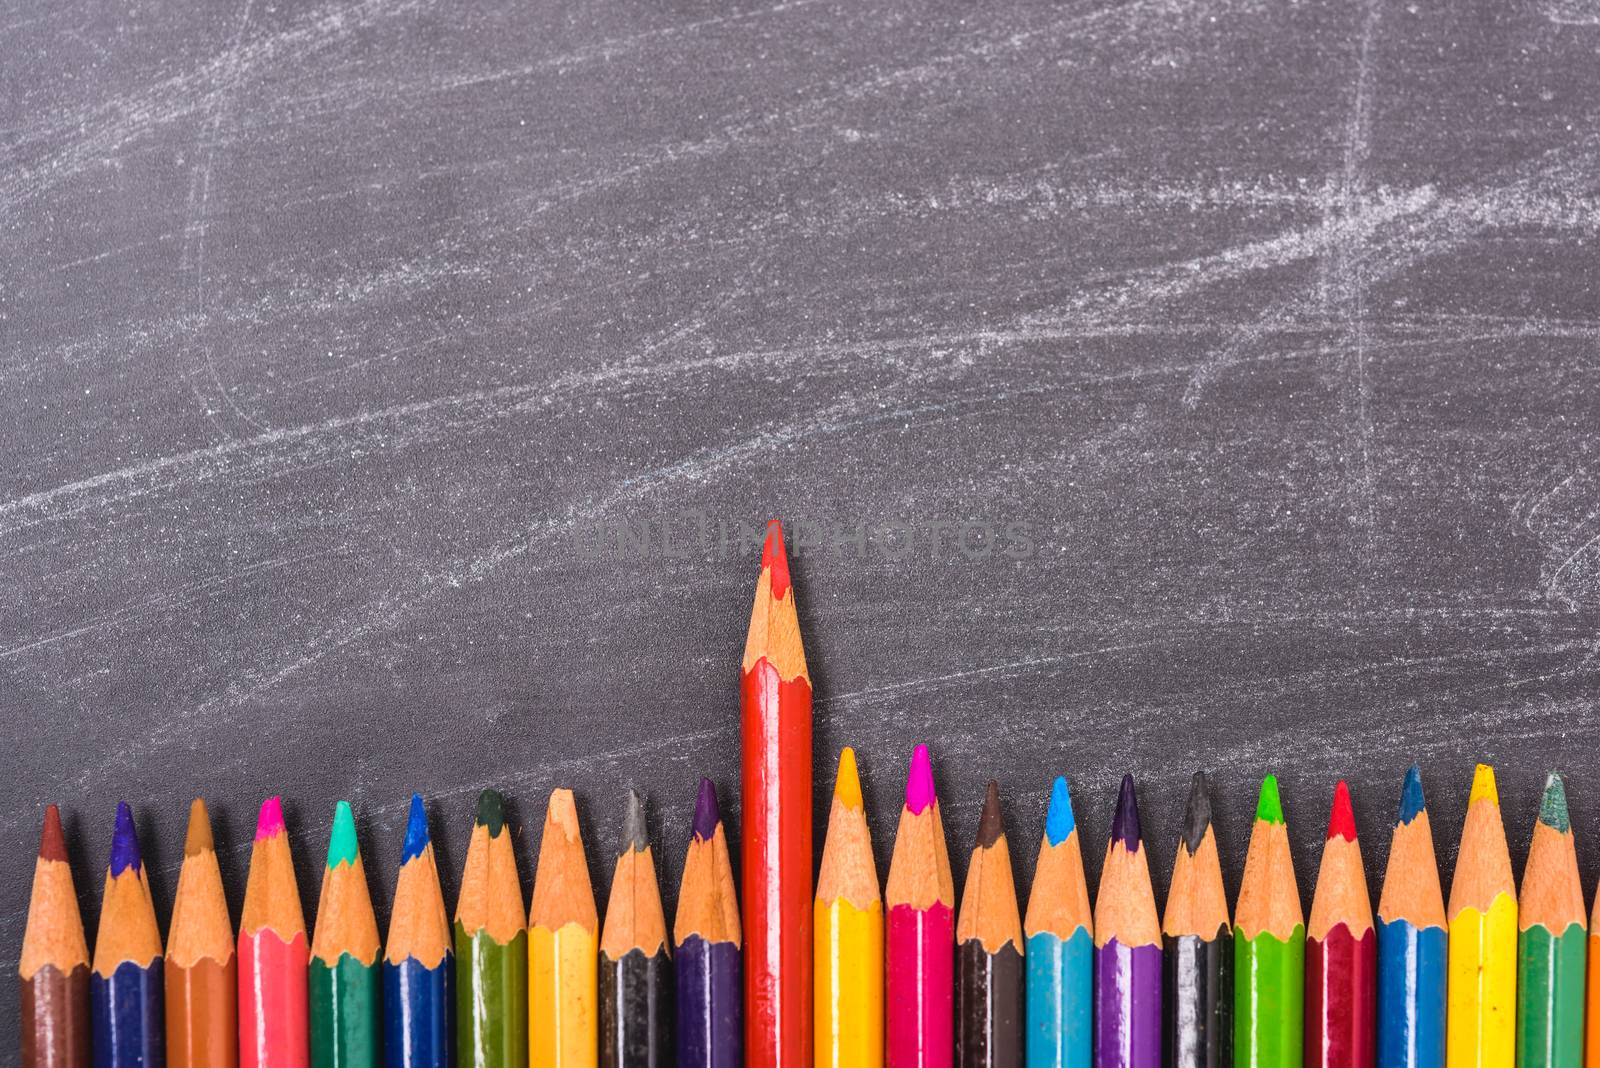 Red pencils color standing out from the crowd on blackboard and have chalkboard